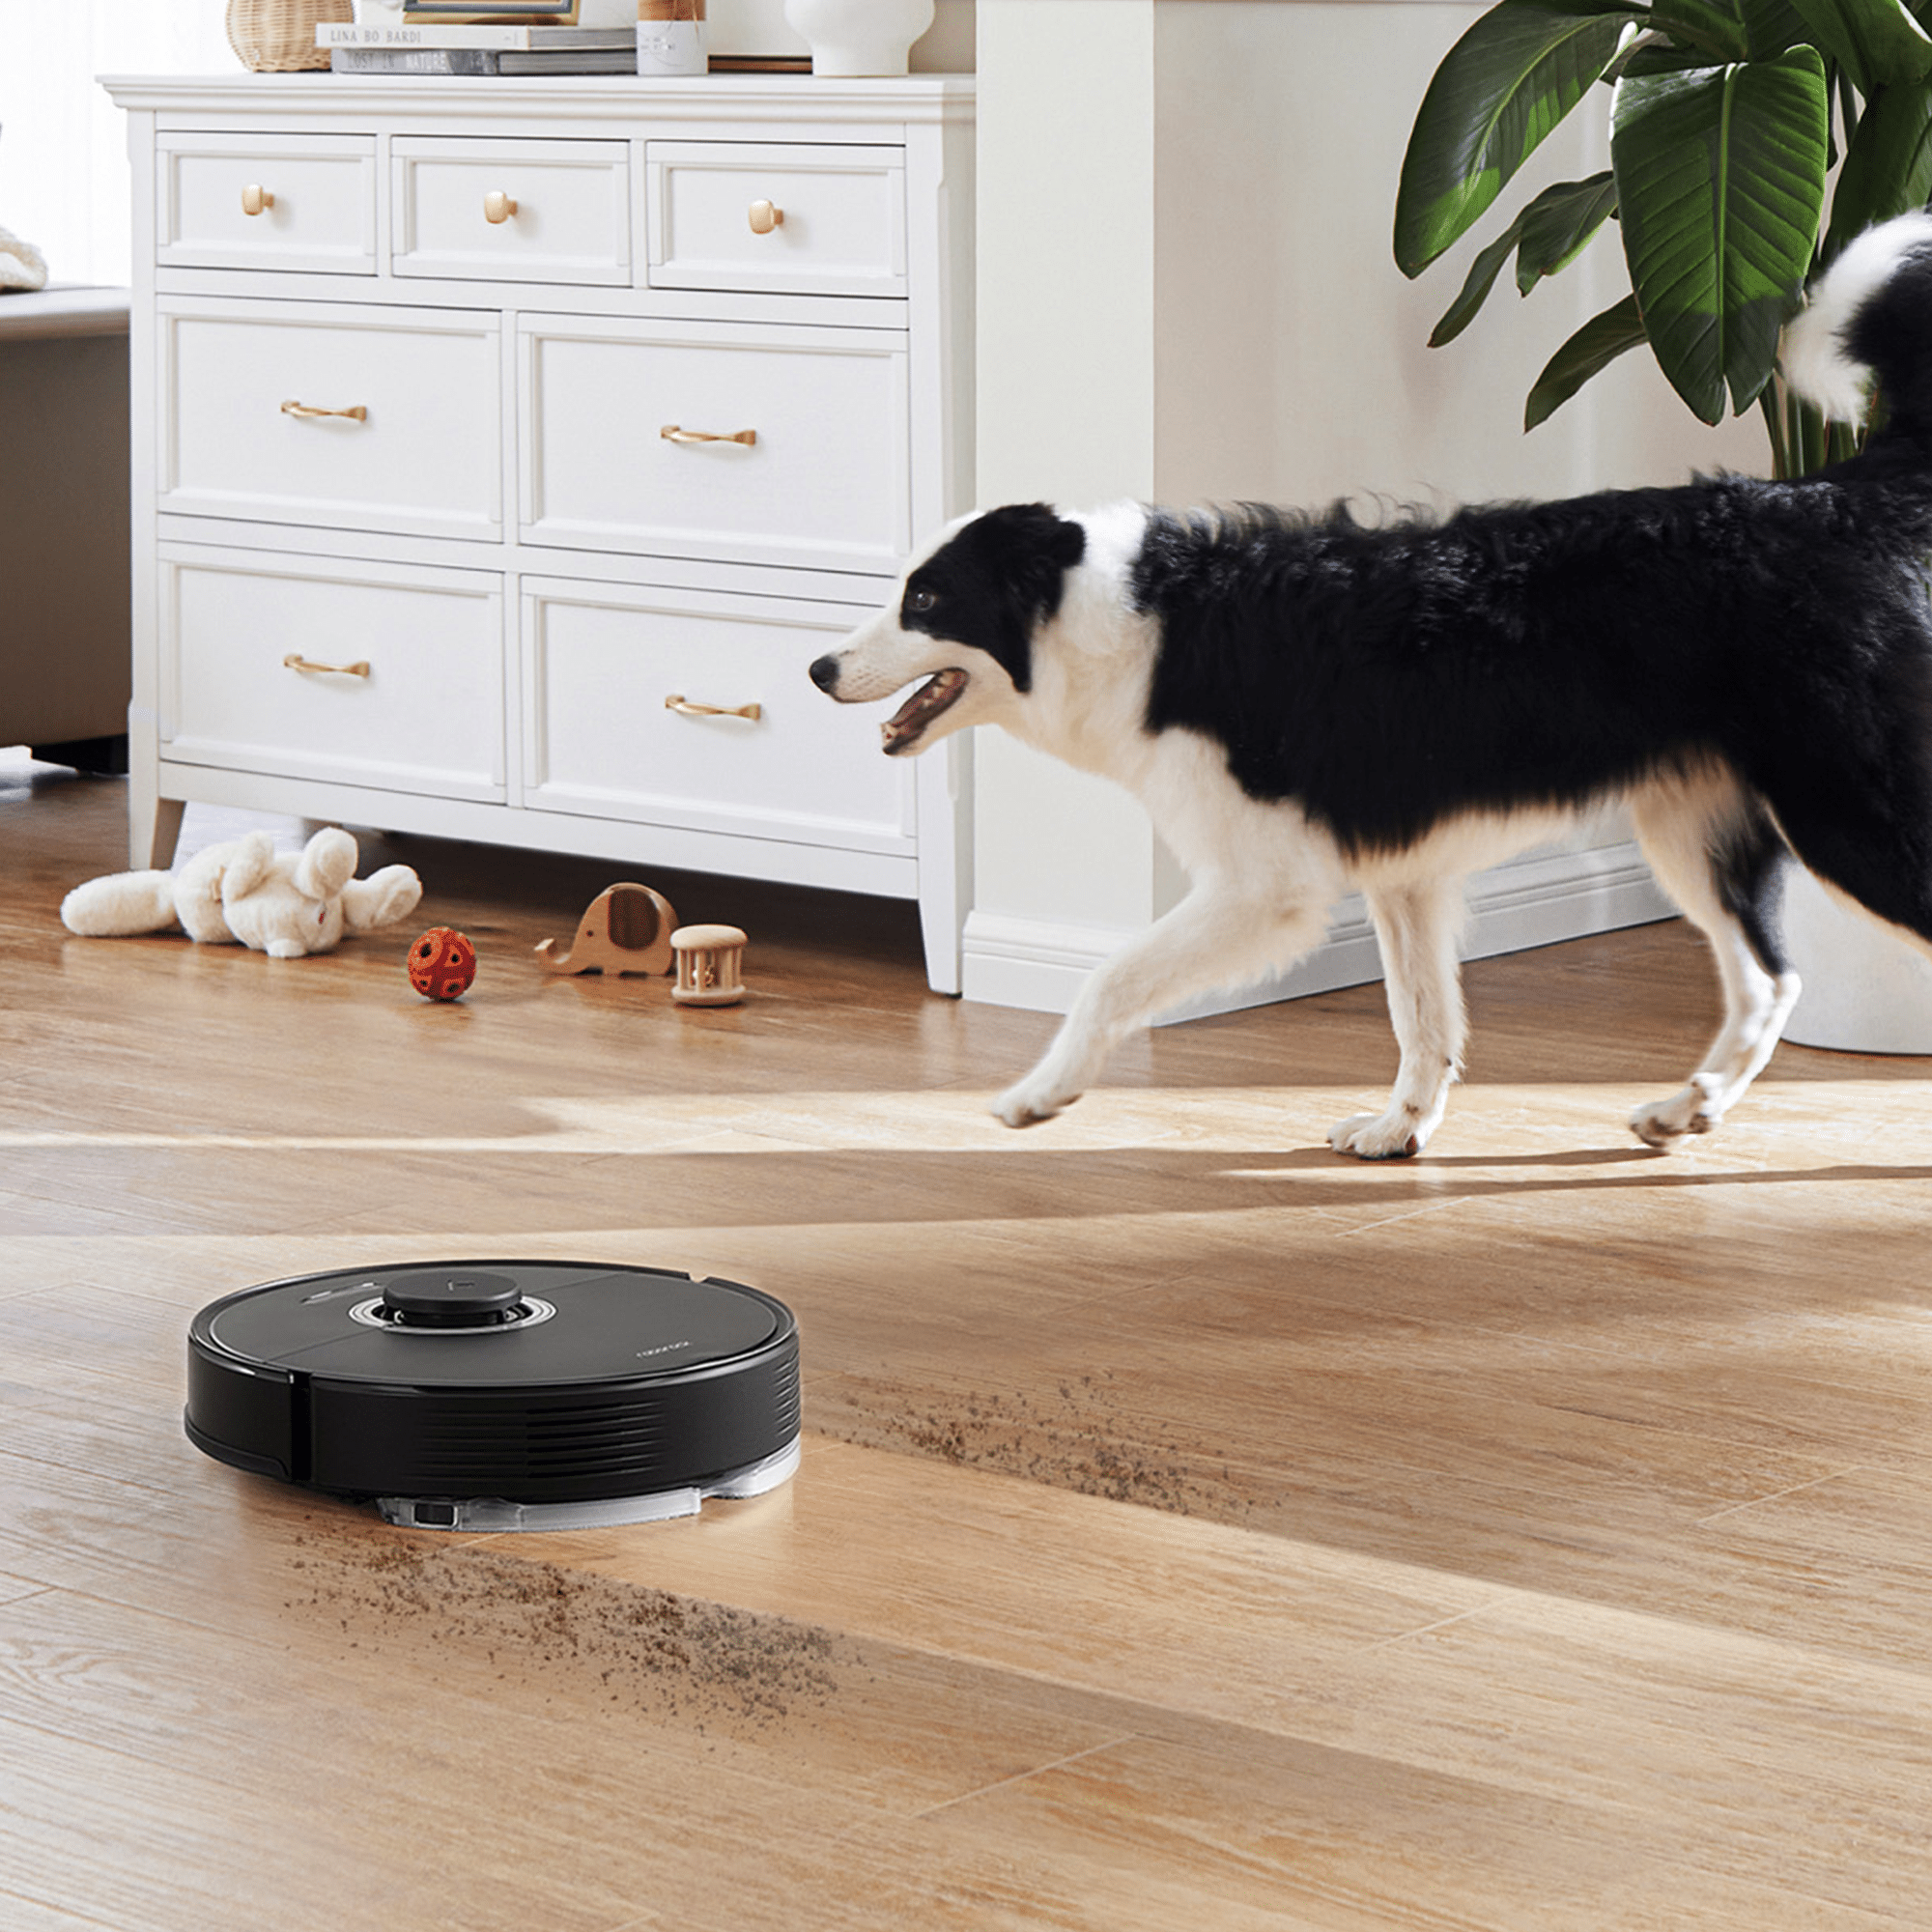 roborock Q7 Max Robot Vacuum and Mop Cleaner, 4200Pa Strong Suction, Lidar  Navigation, Multi-Level Mapping, No-Go&No-Mop Zones, 180mins Runtime, Works